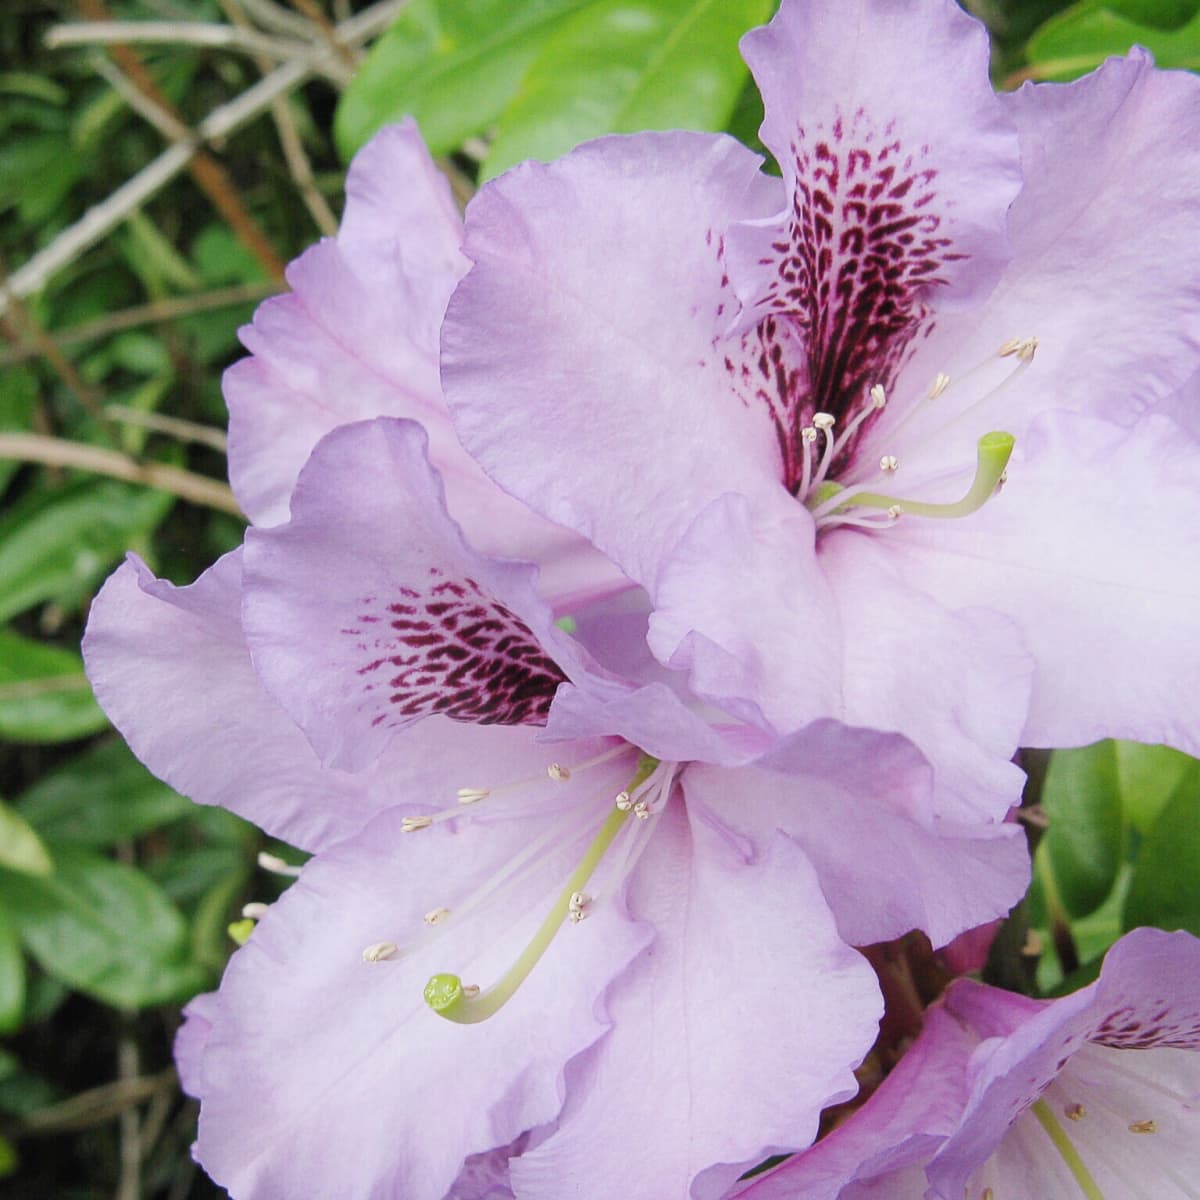 Rhododendron Plant Facts, Care - Dengarden